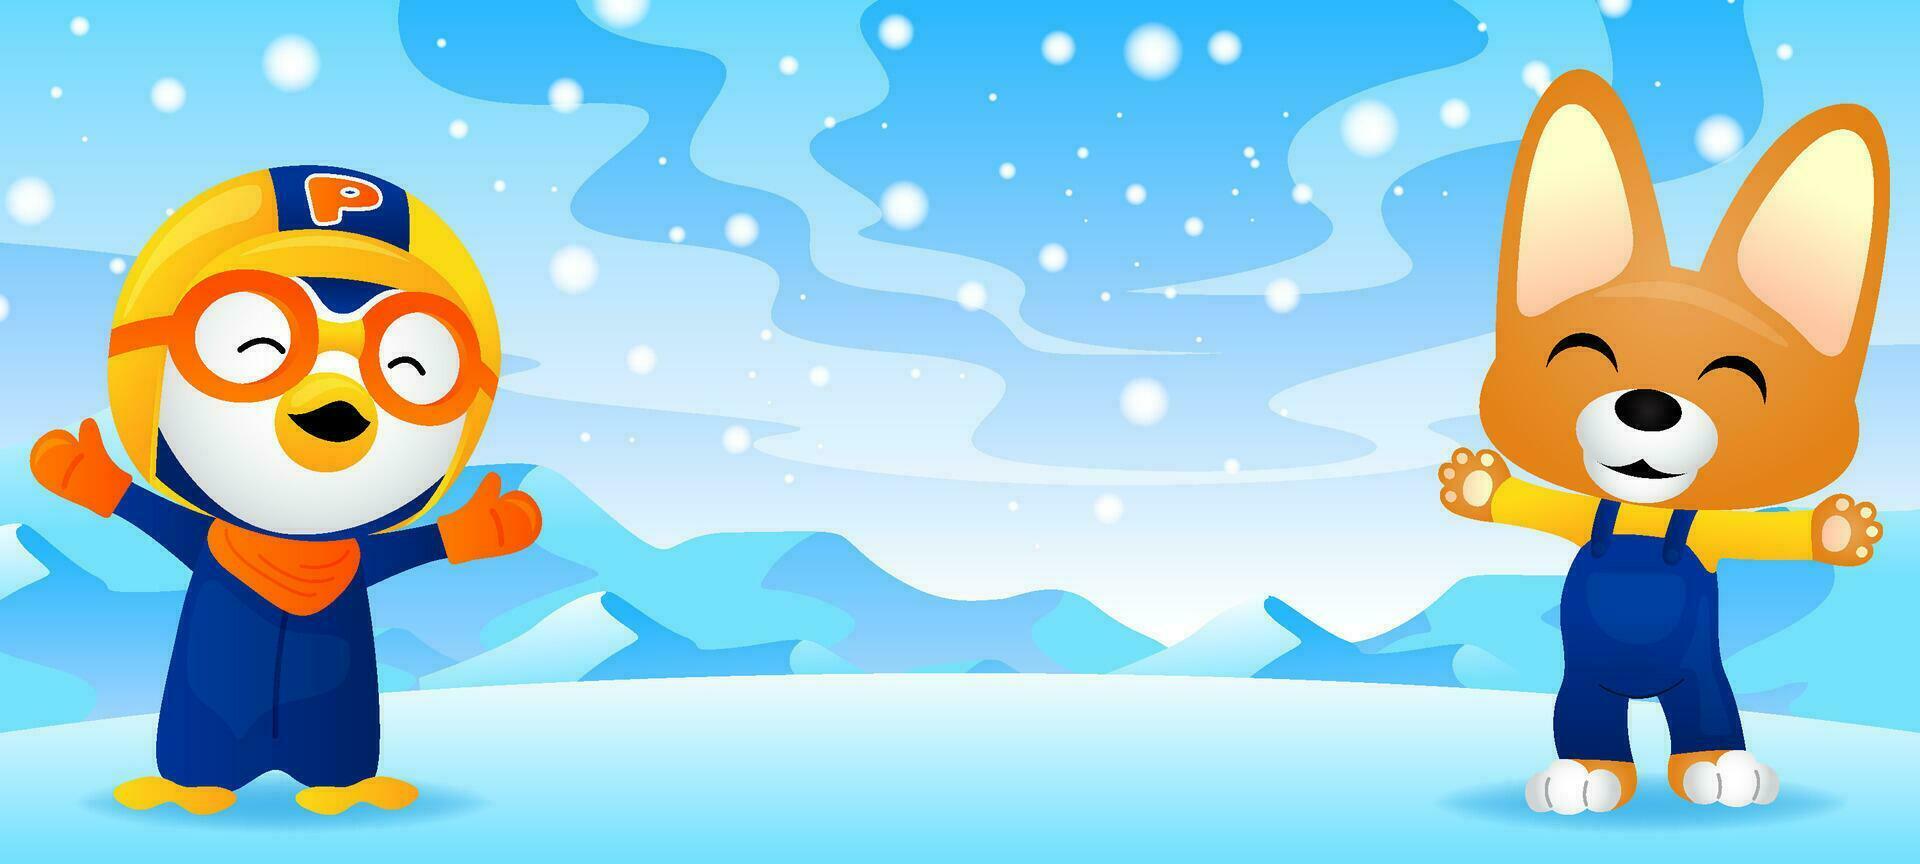 Cute Little Penguin and Cute Fox in the Snow vector